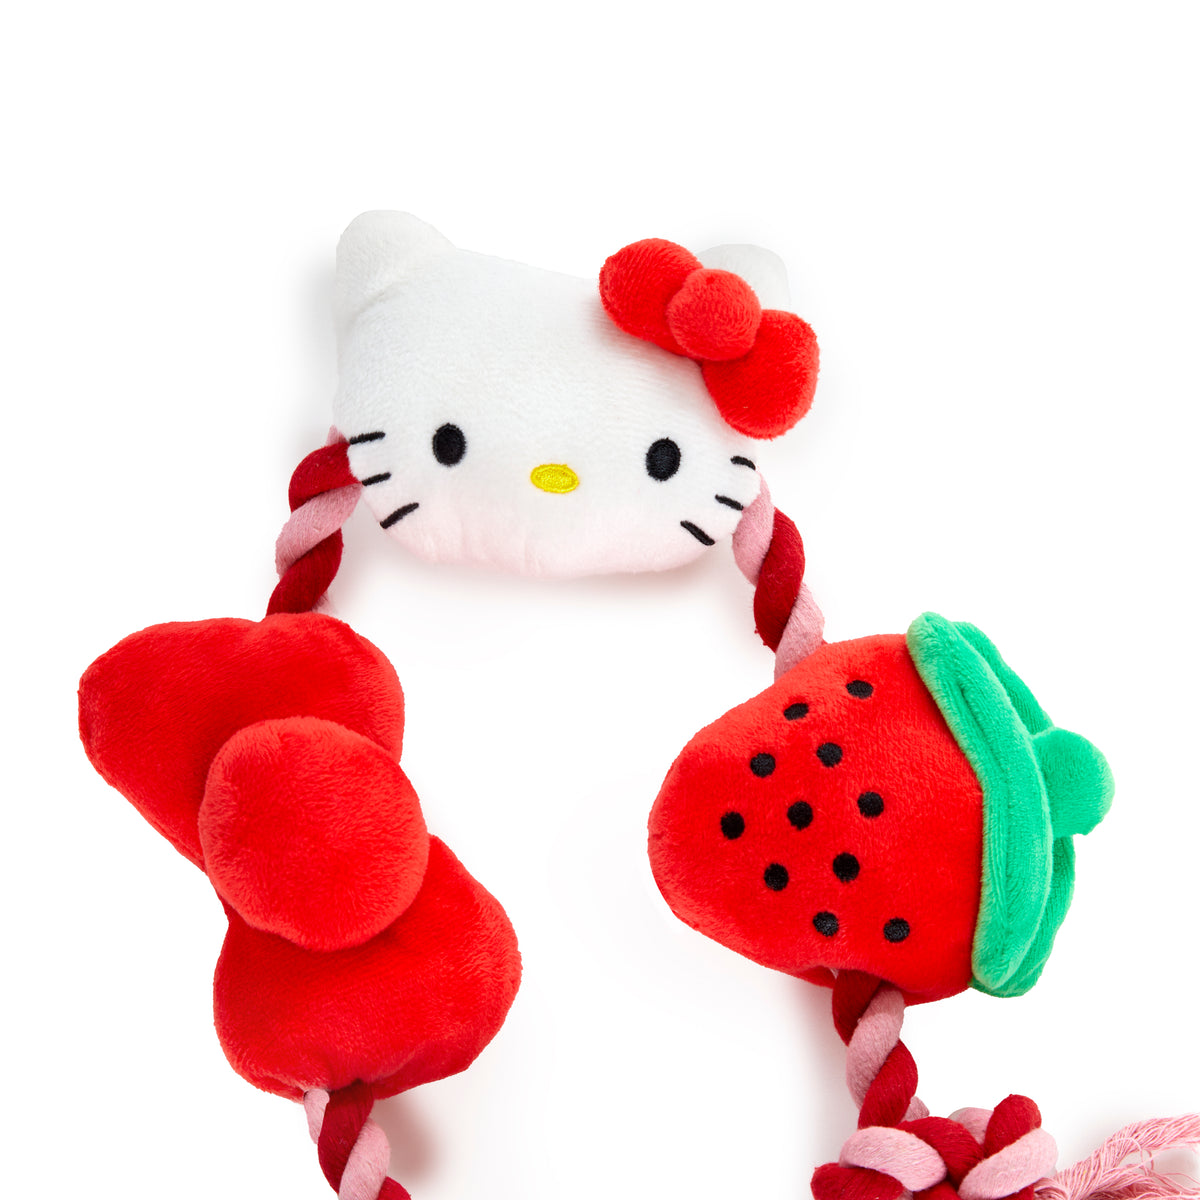 Hello Kitty Pet Rope Toy (Strawberry and Bows) Home Goods Jazwares LLC   